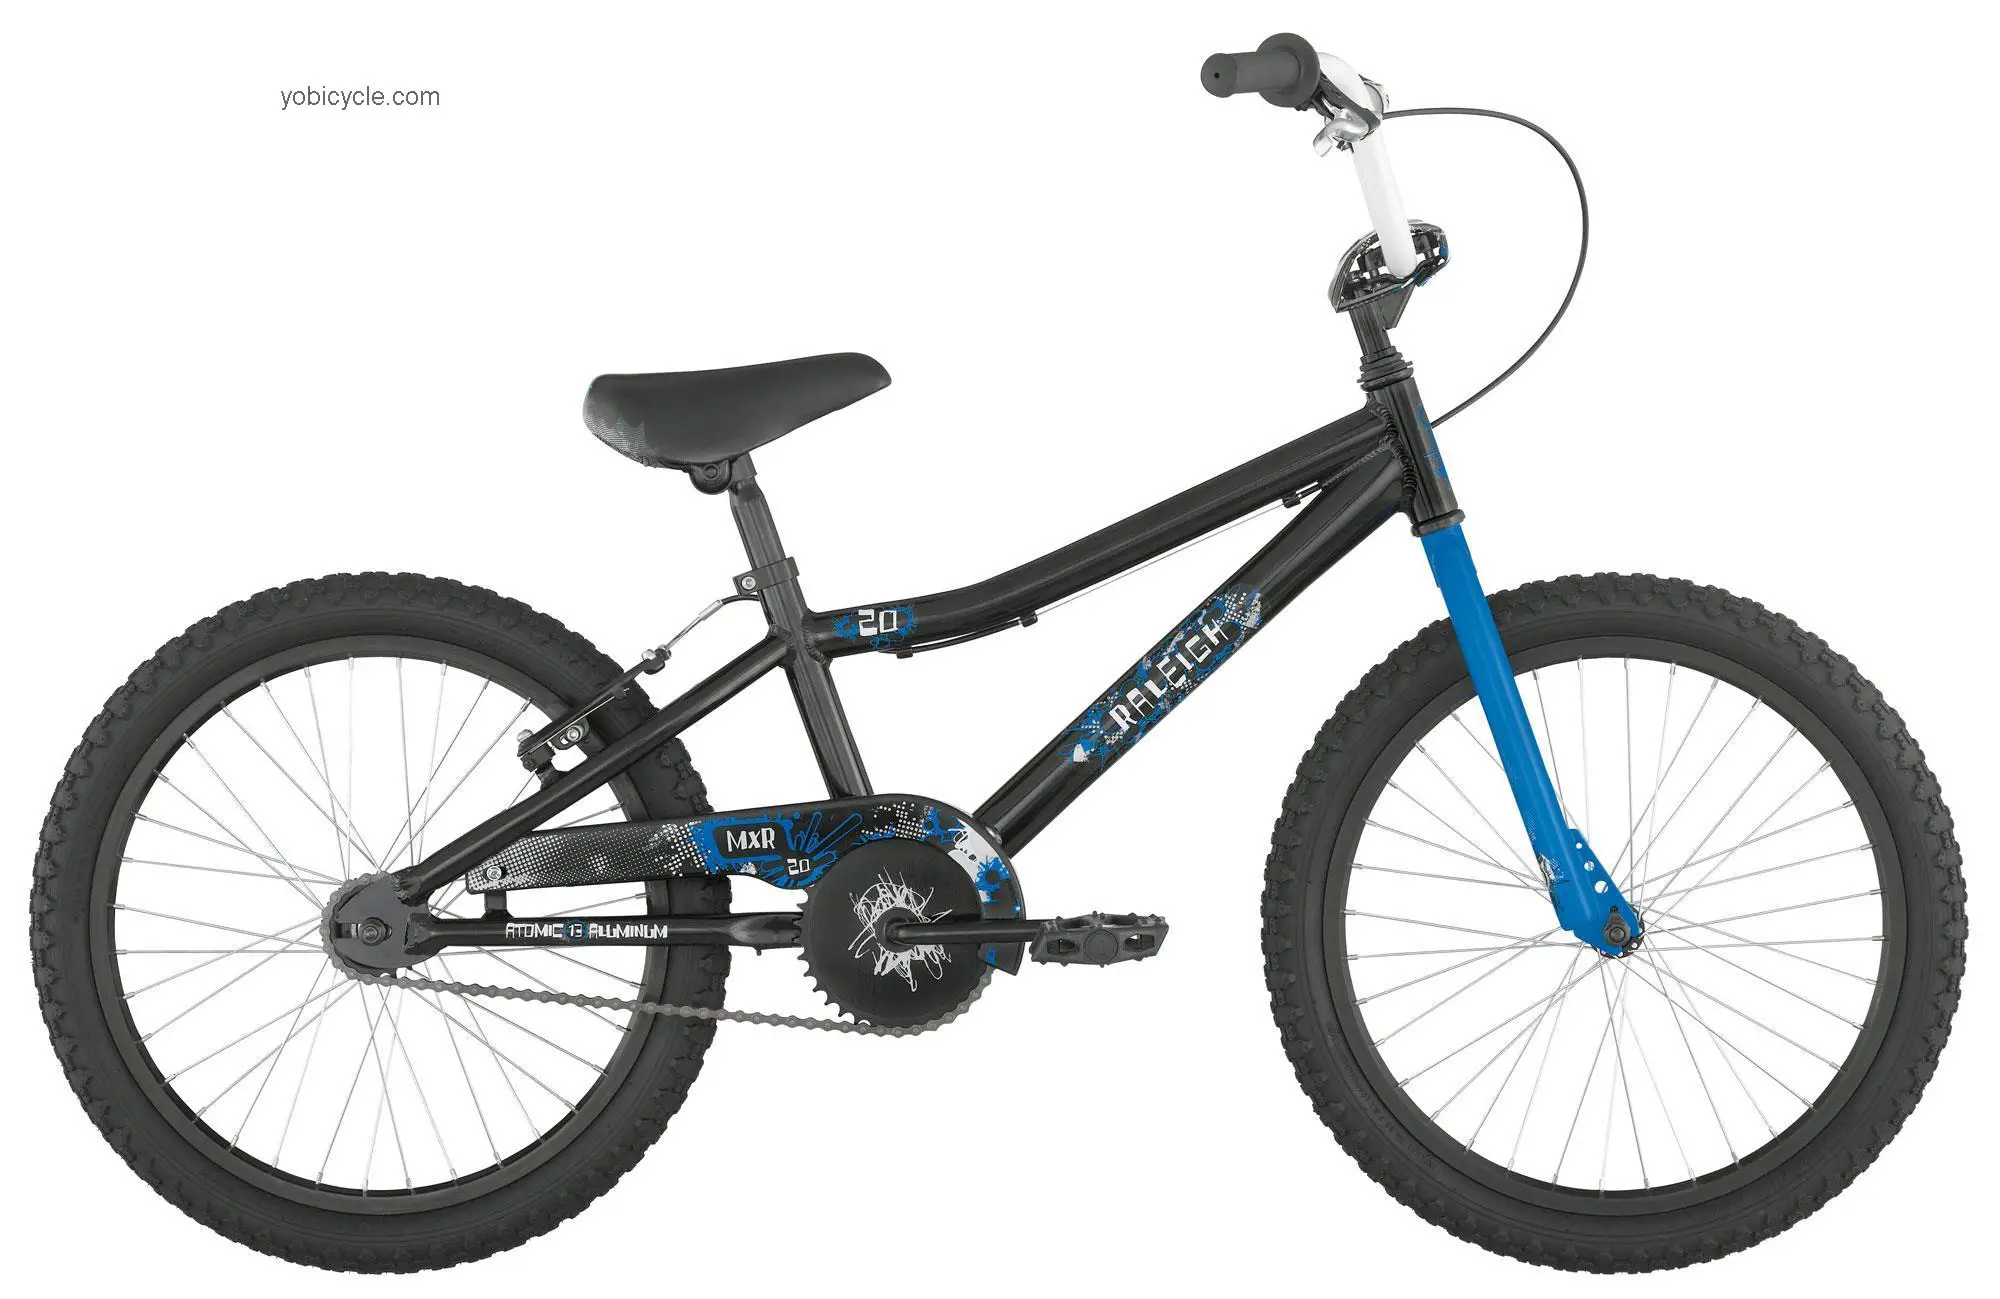 Raleigh MXR 2012 comparison online with competitors